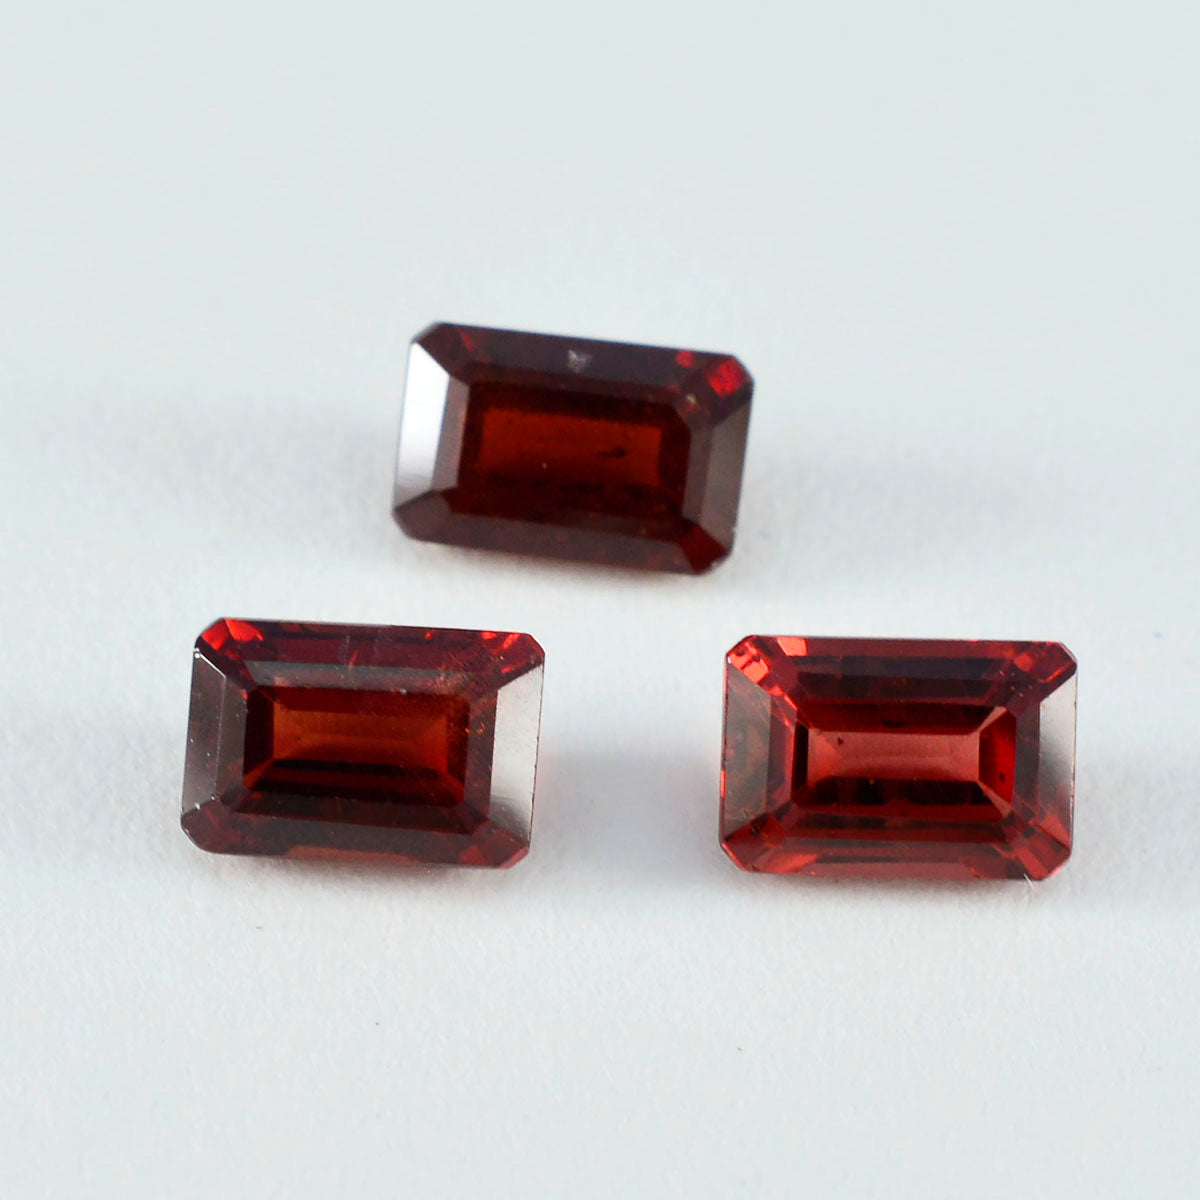 Riyogems 1PC Natural Red Garnet Faceted 7x9 mm Octagon Shape Nice Quality Loose Stone